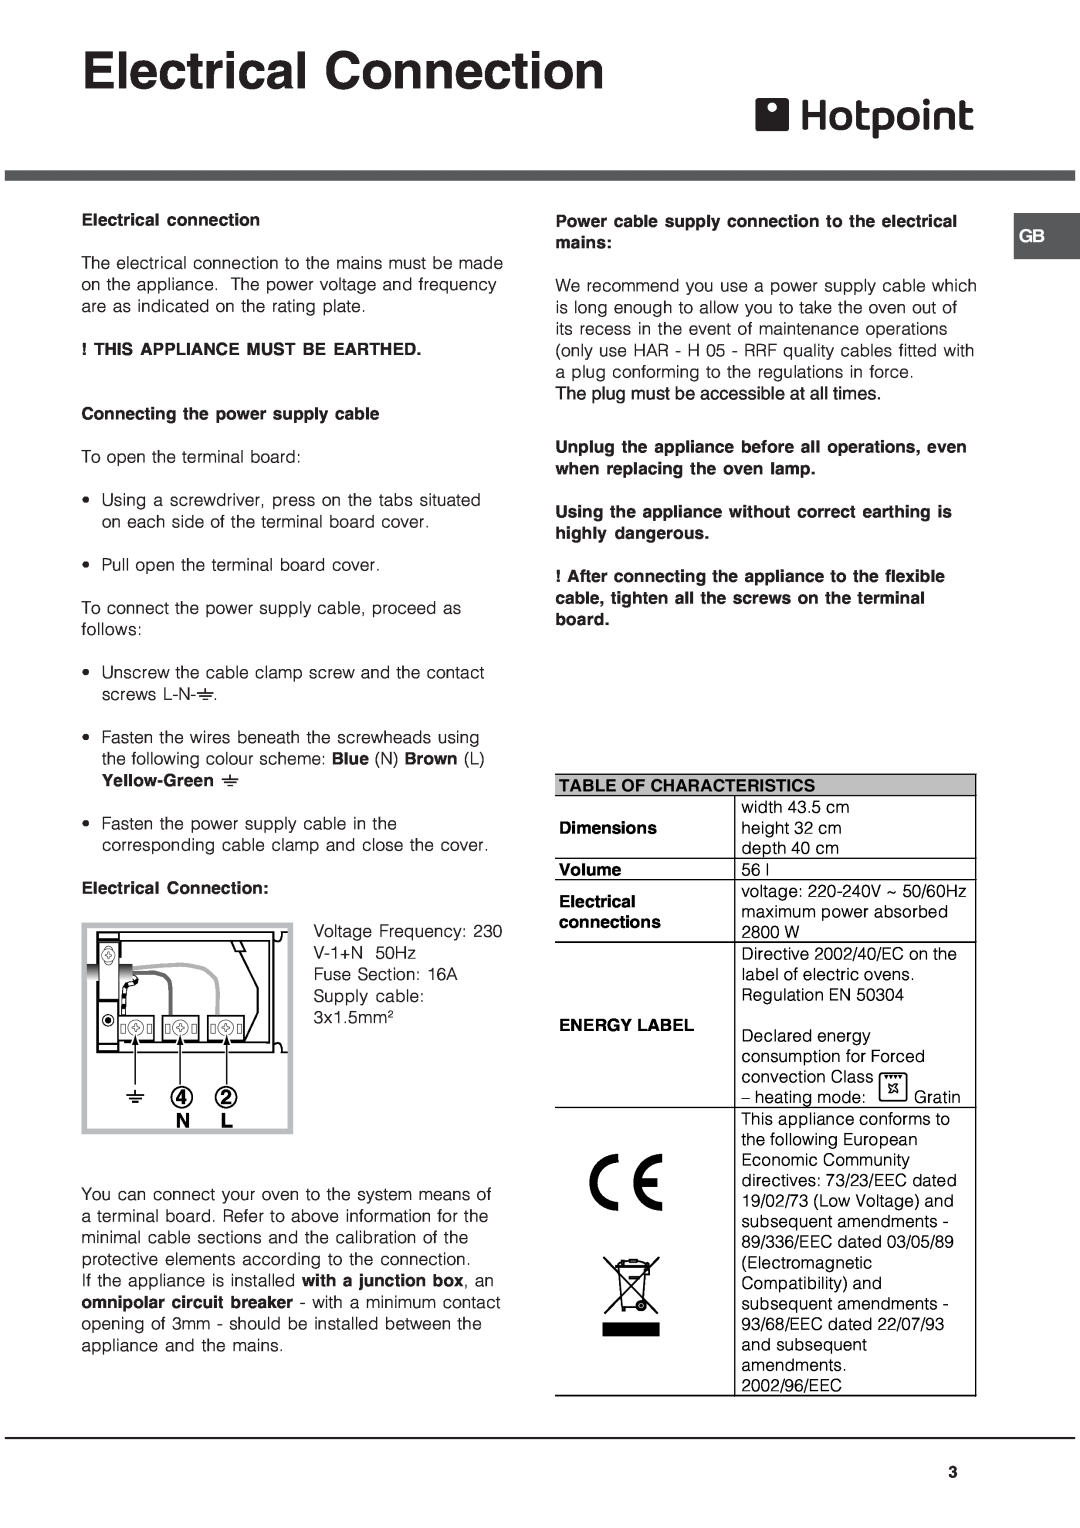 Hotpoint SE101PX manual Electrical Connection, 4 2 N L, The plug must be accessible at all times 